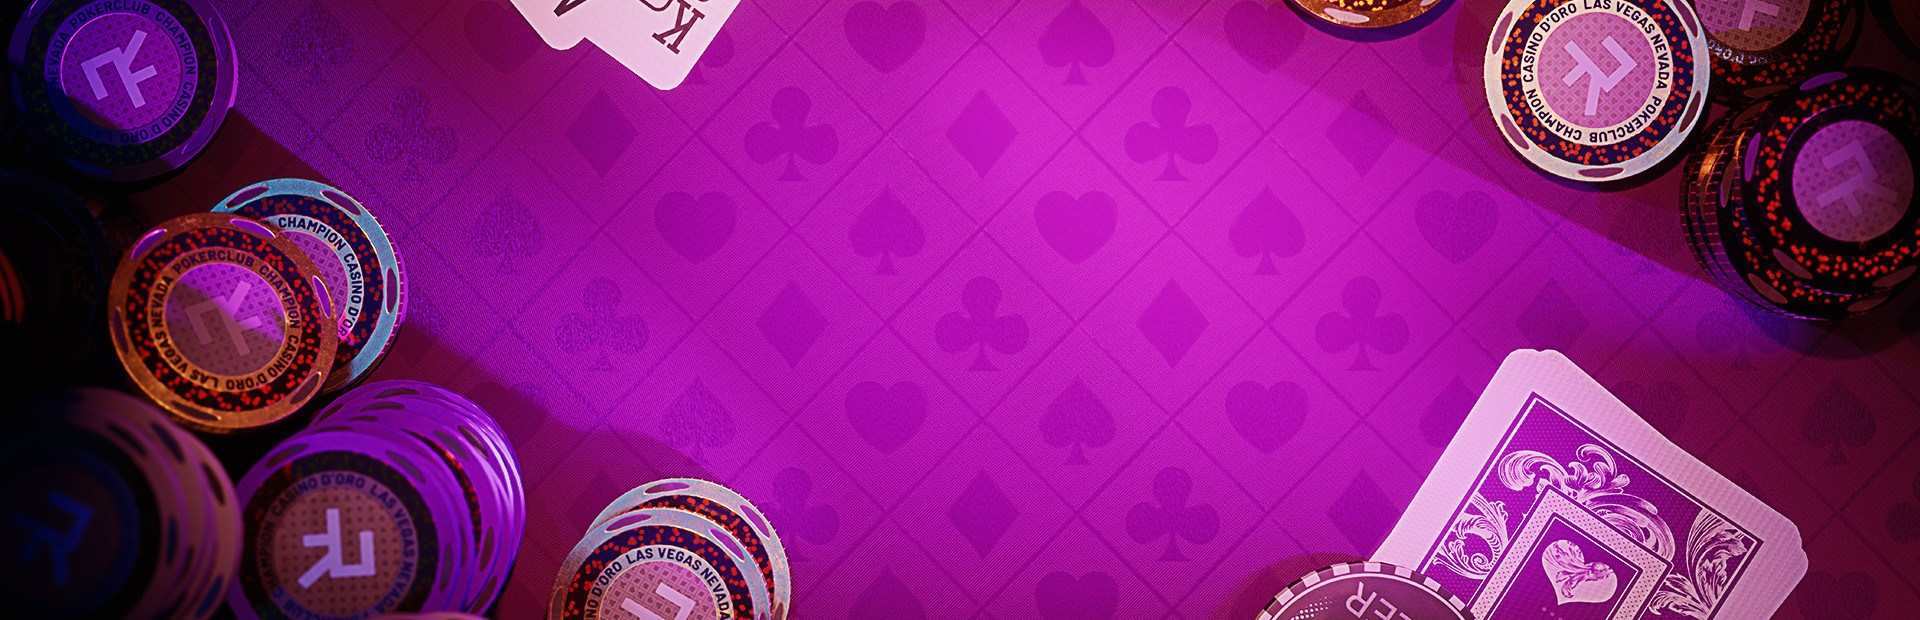 Poker Club cover image